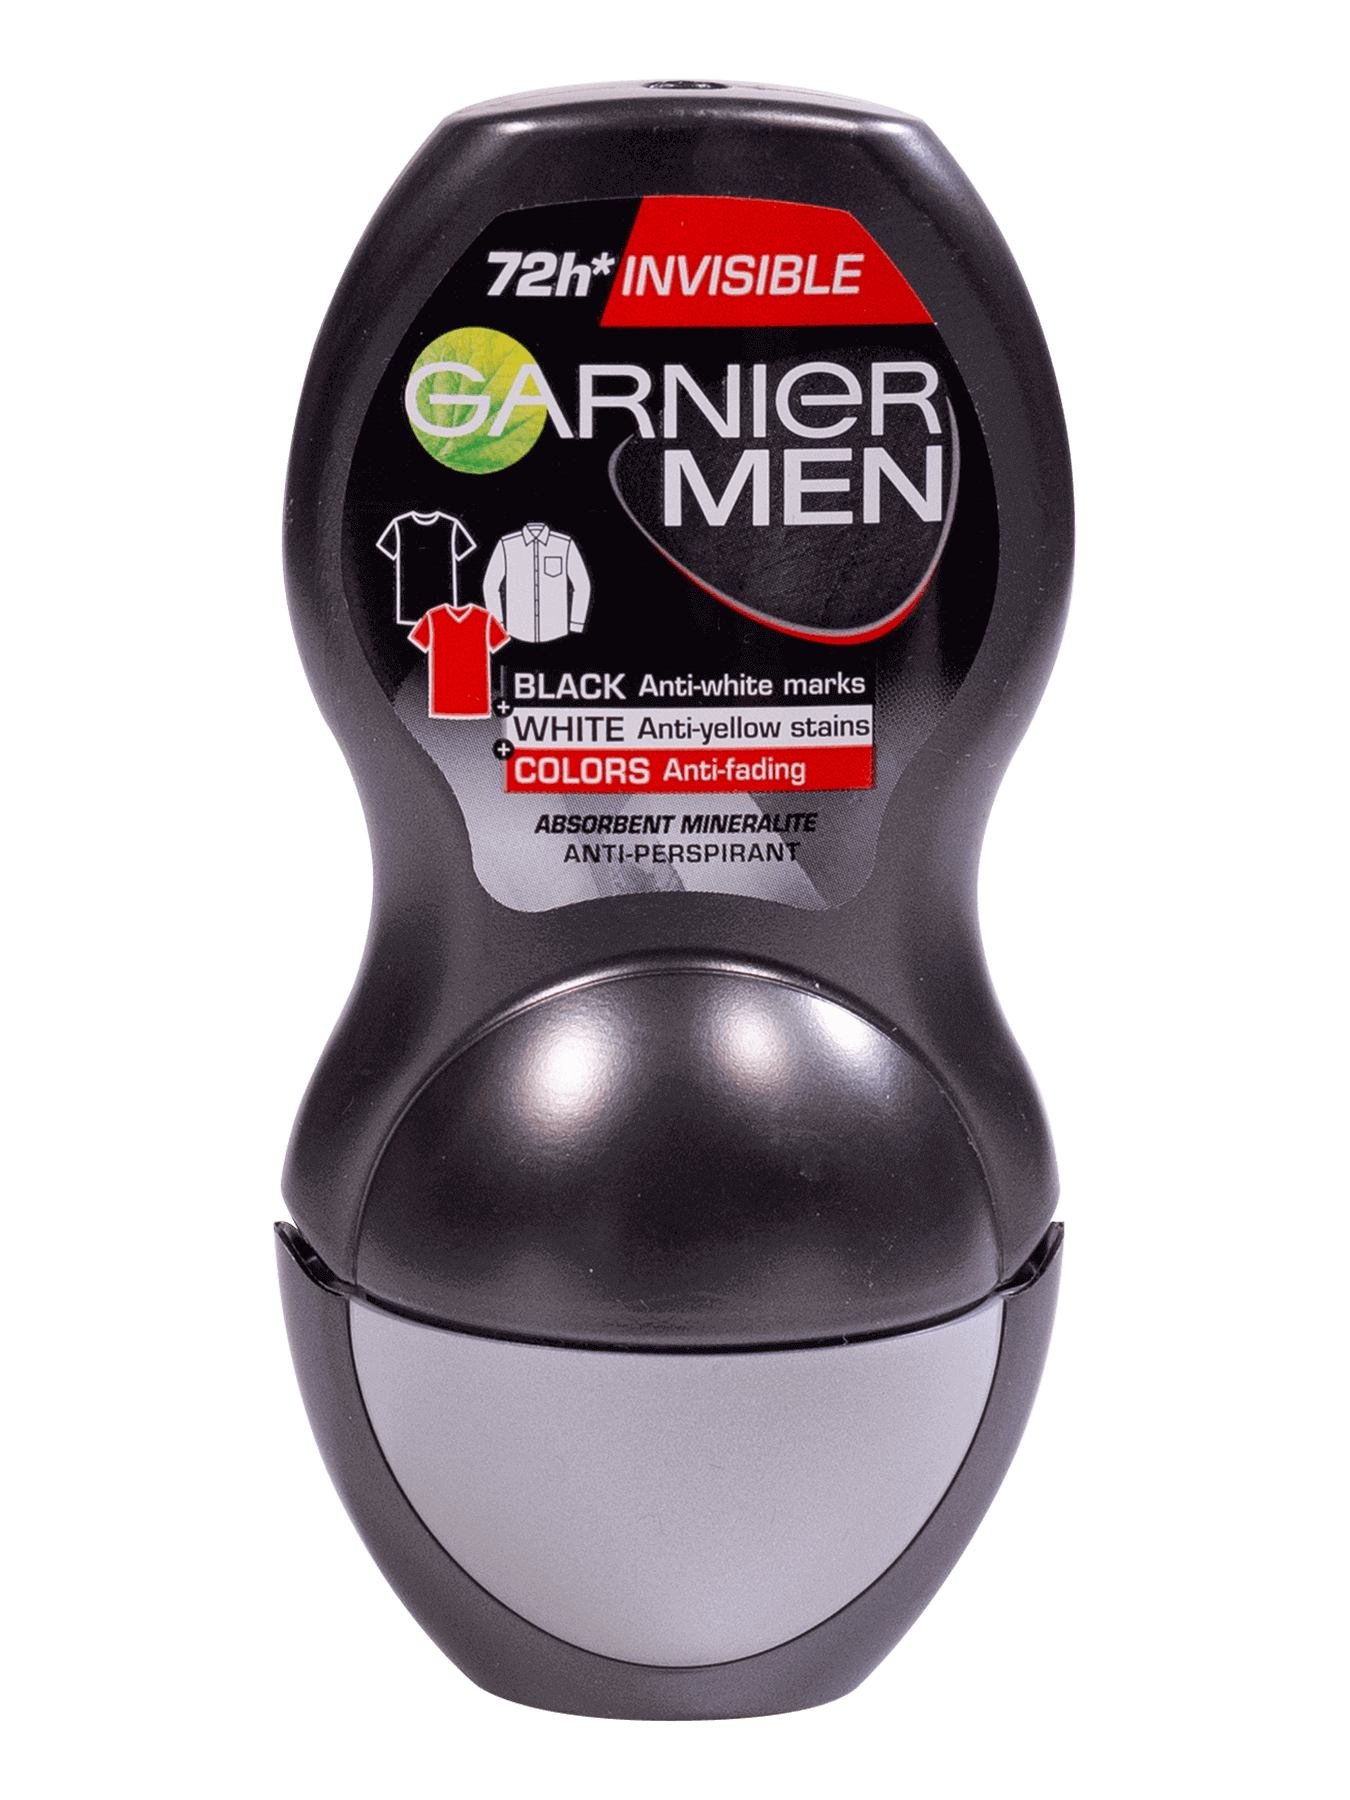 Garnier Deo Men ineral Invisible bwc Roll On